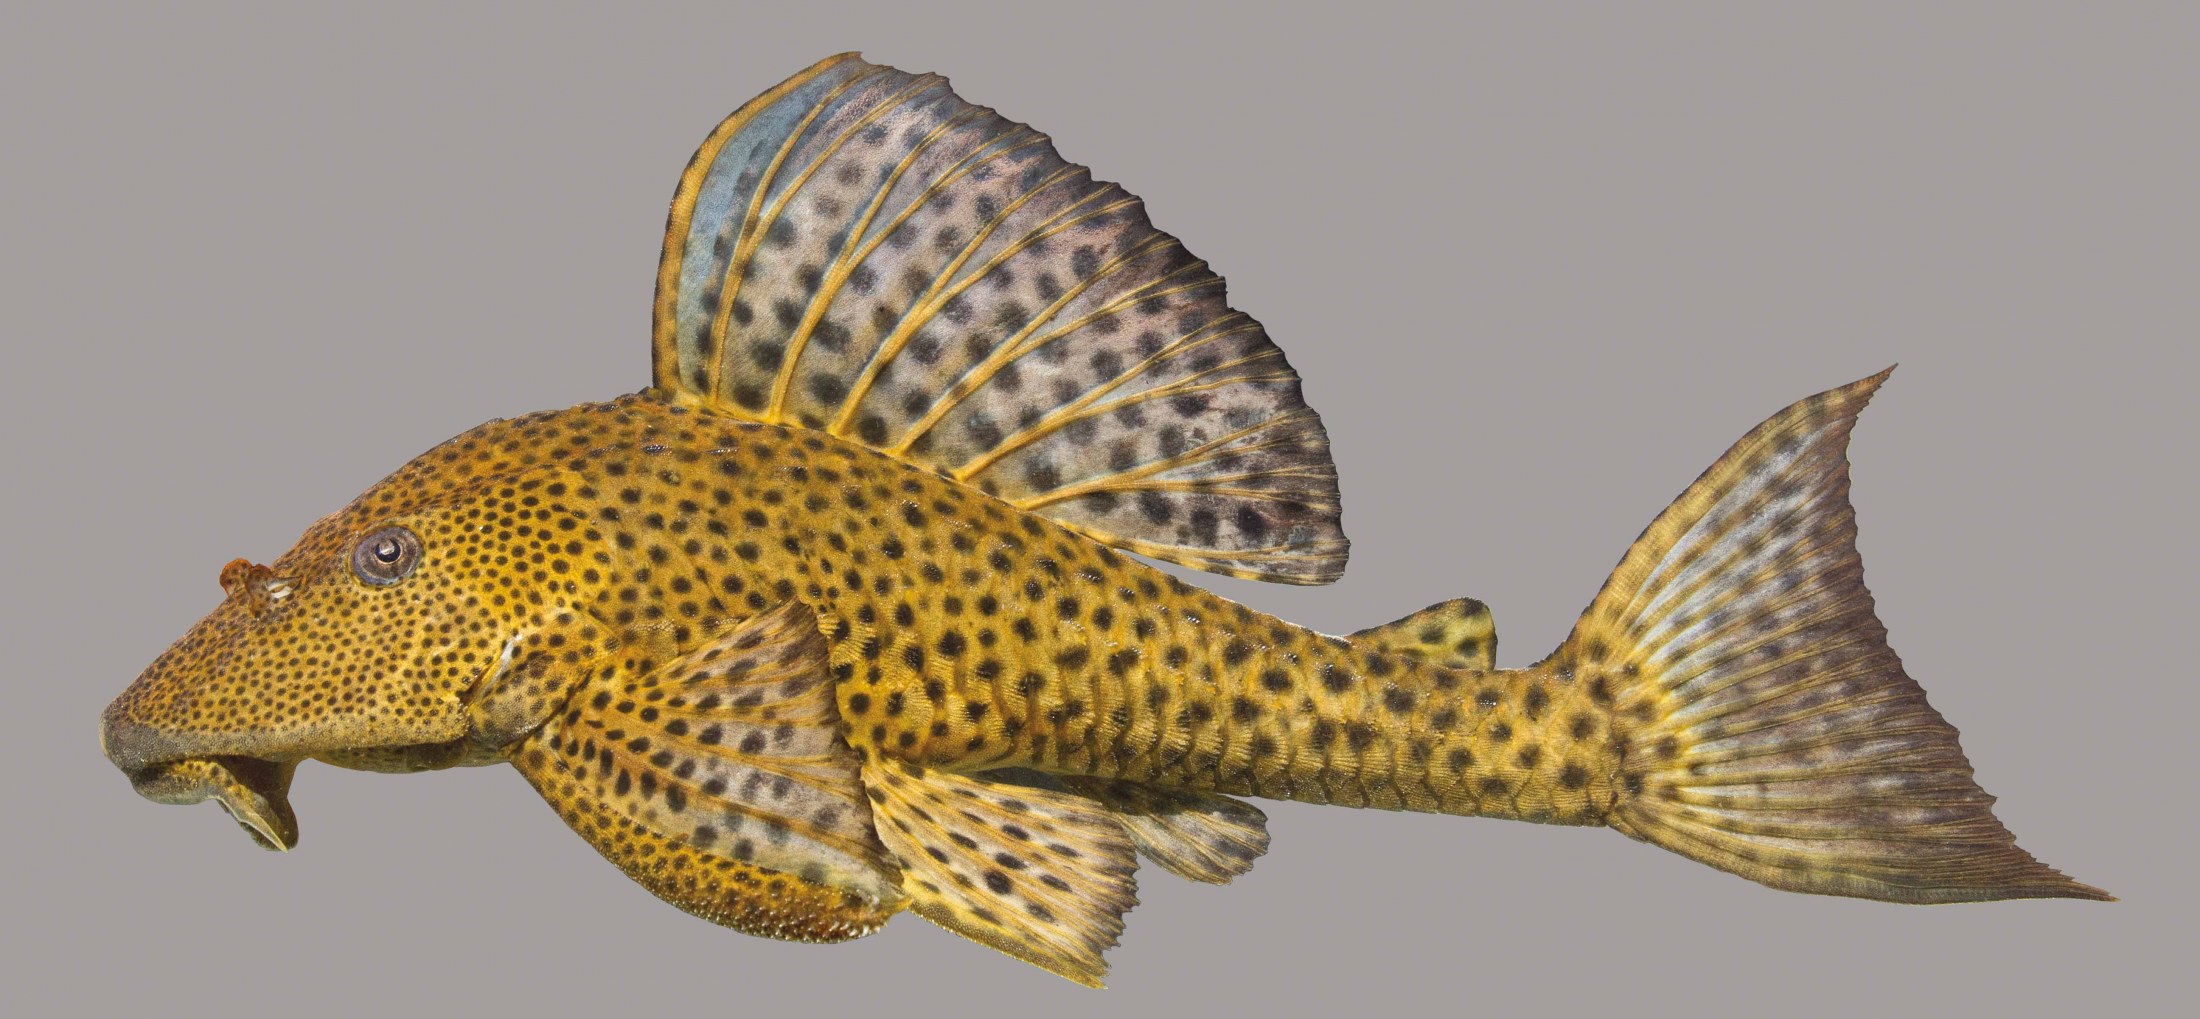 Lateral view of a suckermouth catfish